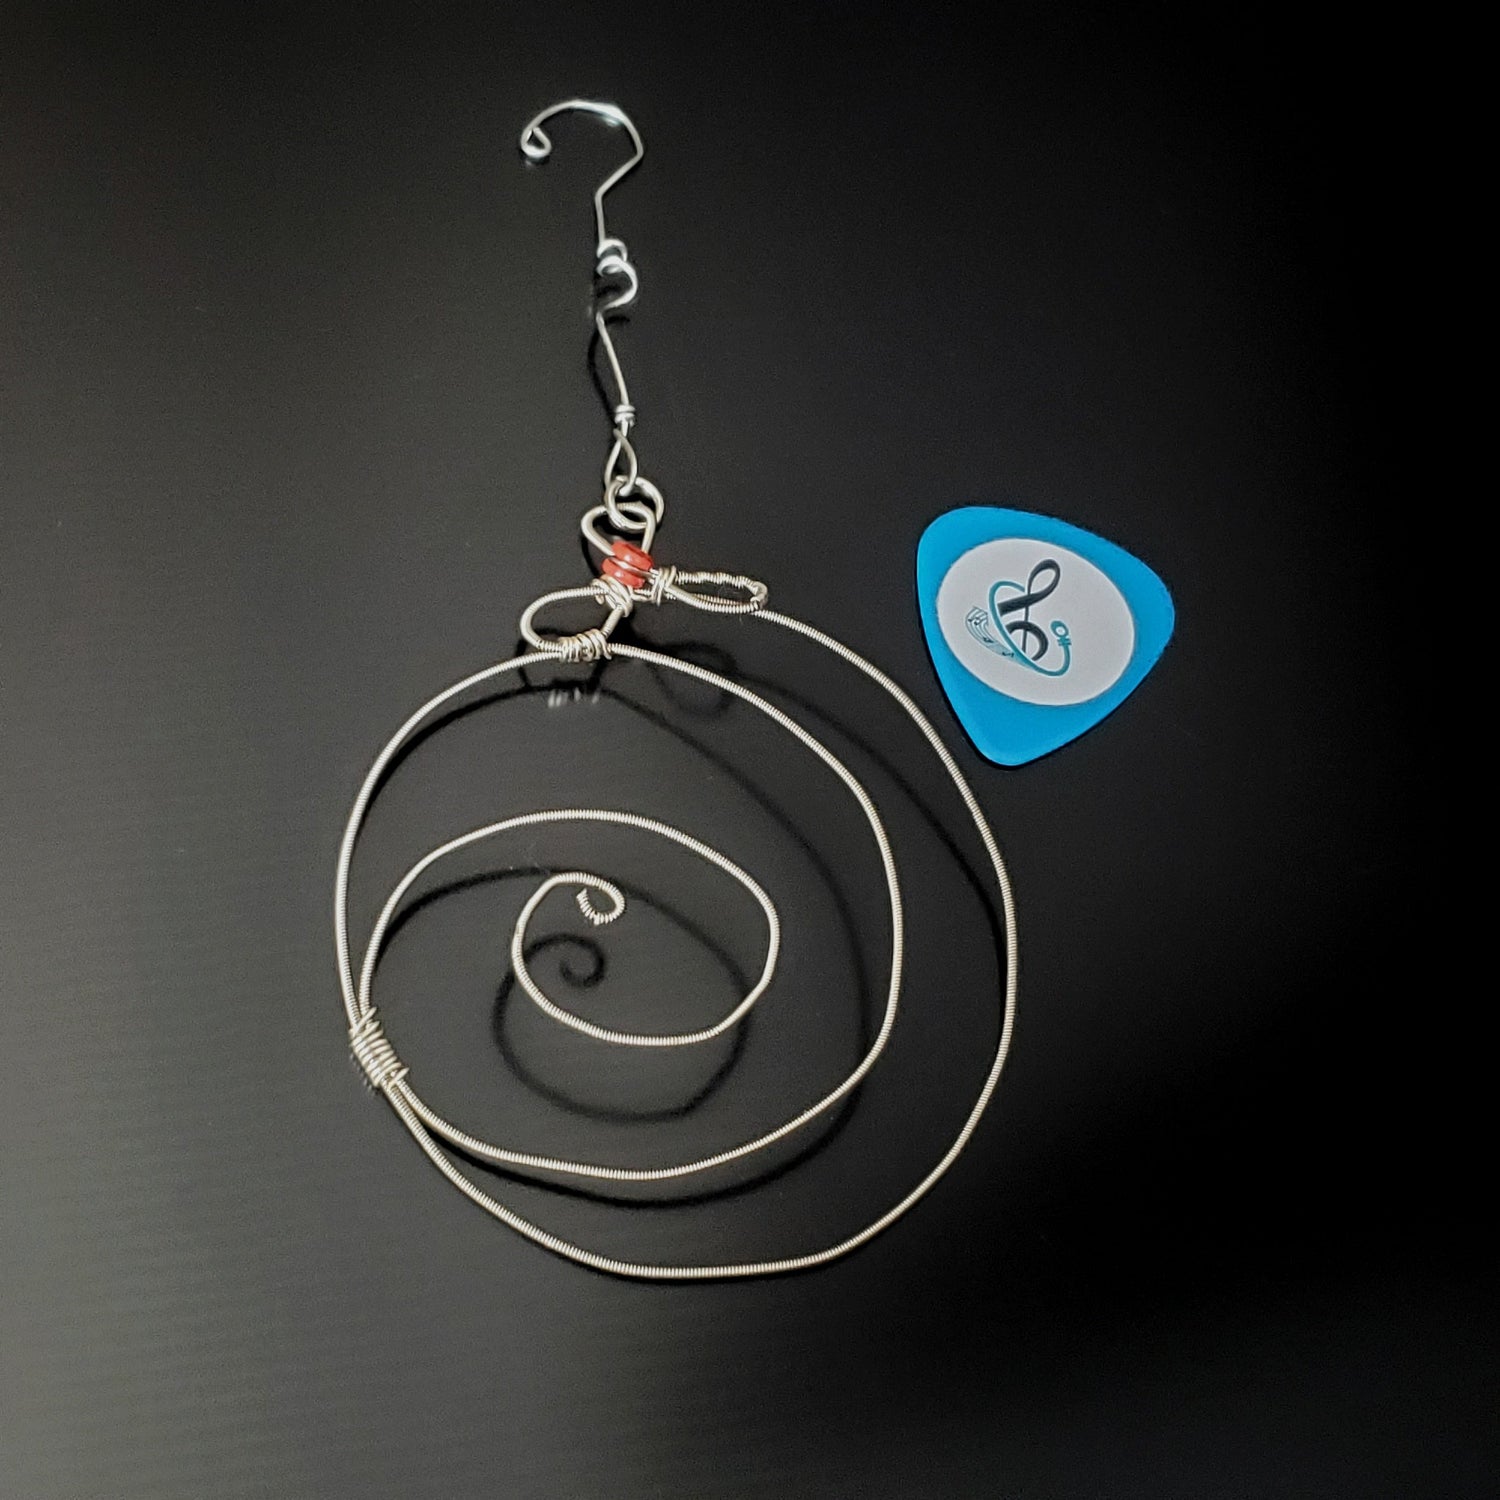 Christmas ornament in the shape of a round swirl made from an upcycled guitar string next to a guitar pick